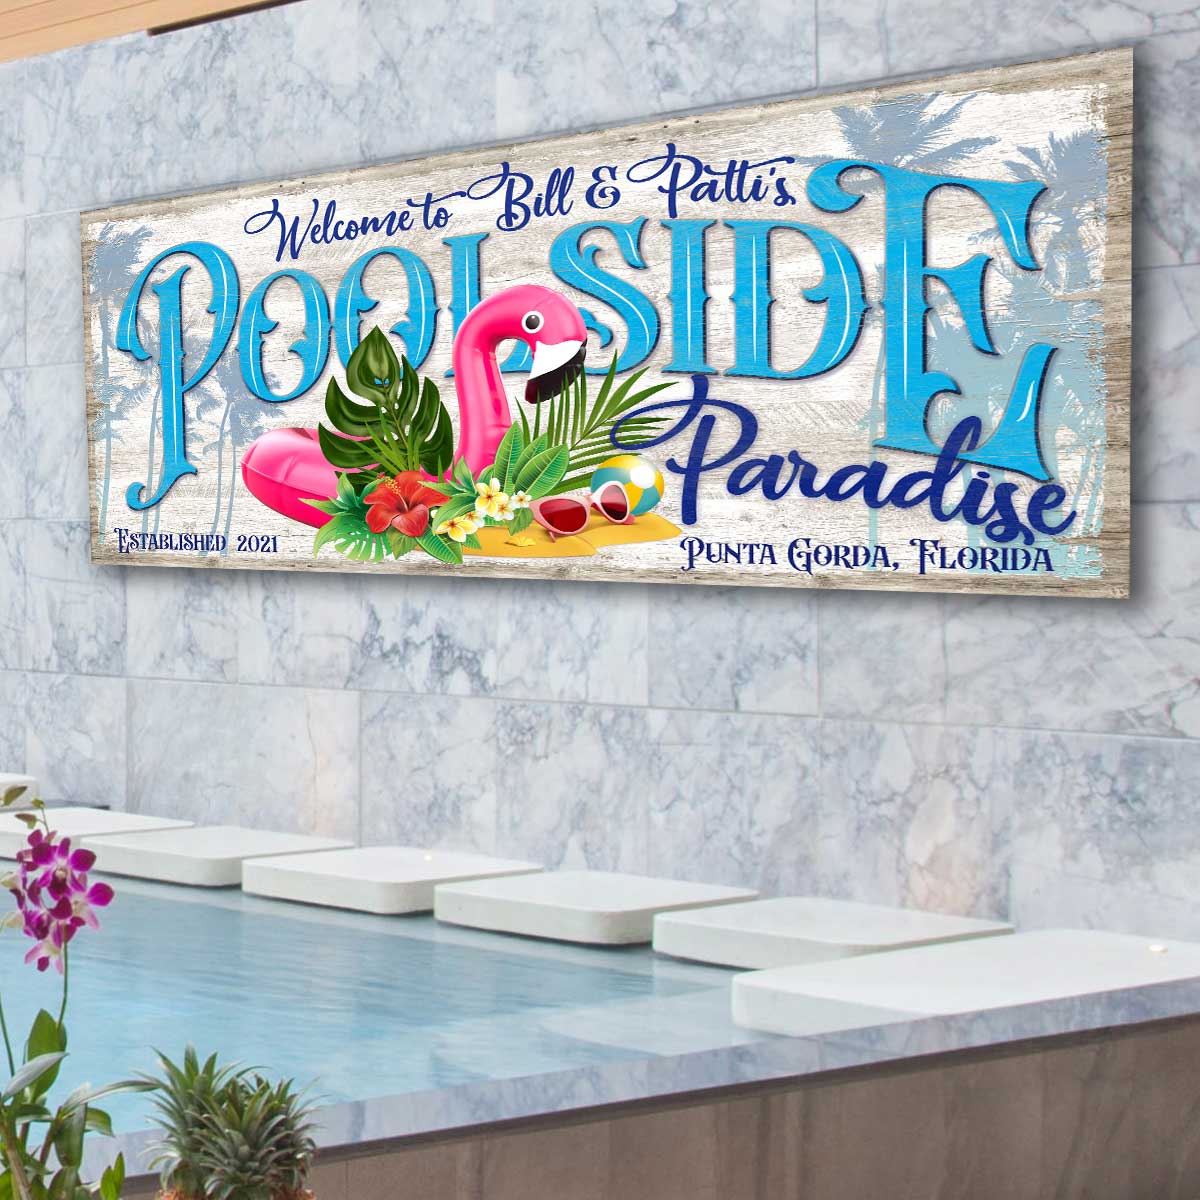 Pool Sign and Pool Decor of a weathered wood background with the words Poolside Paradise, with establish date and city, state. tropical pool and patio sign decor.